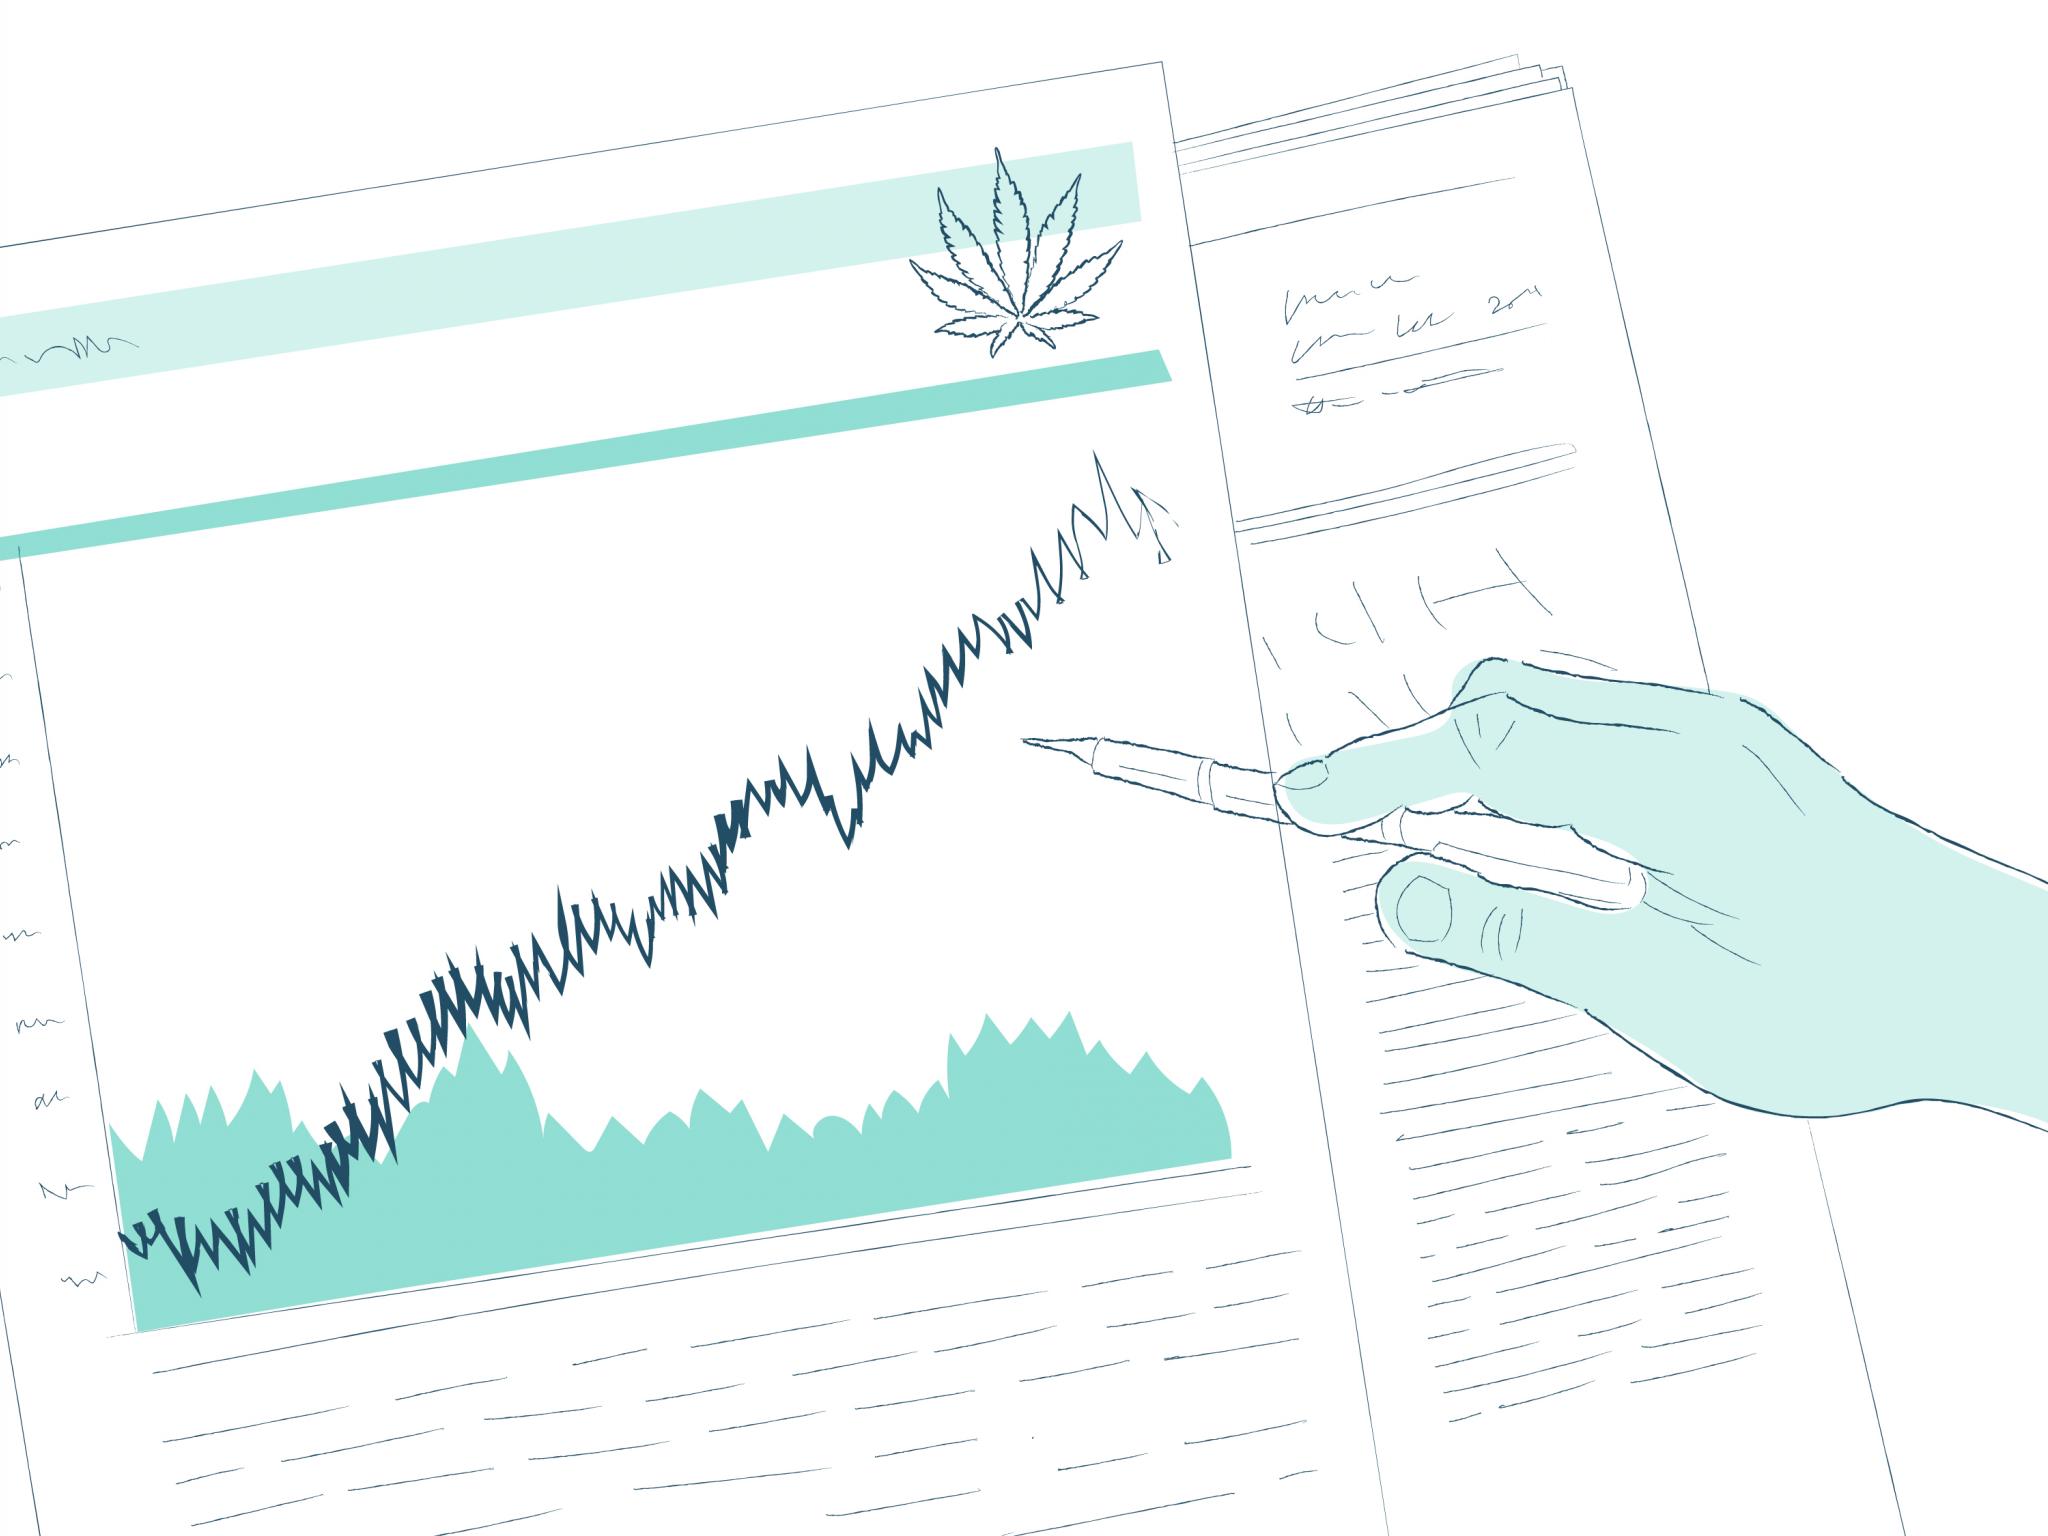  cannabis-stock-gainers-and-losers-from-february-23-2021 